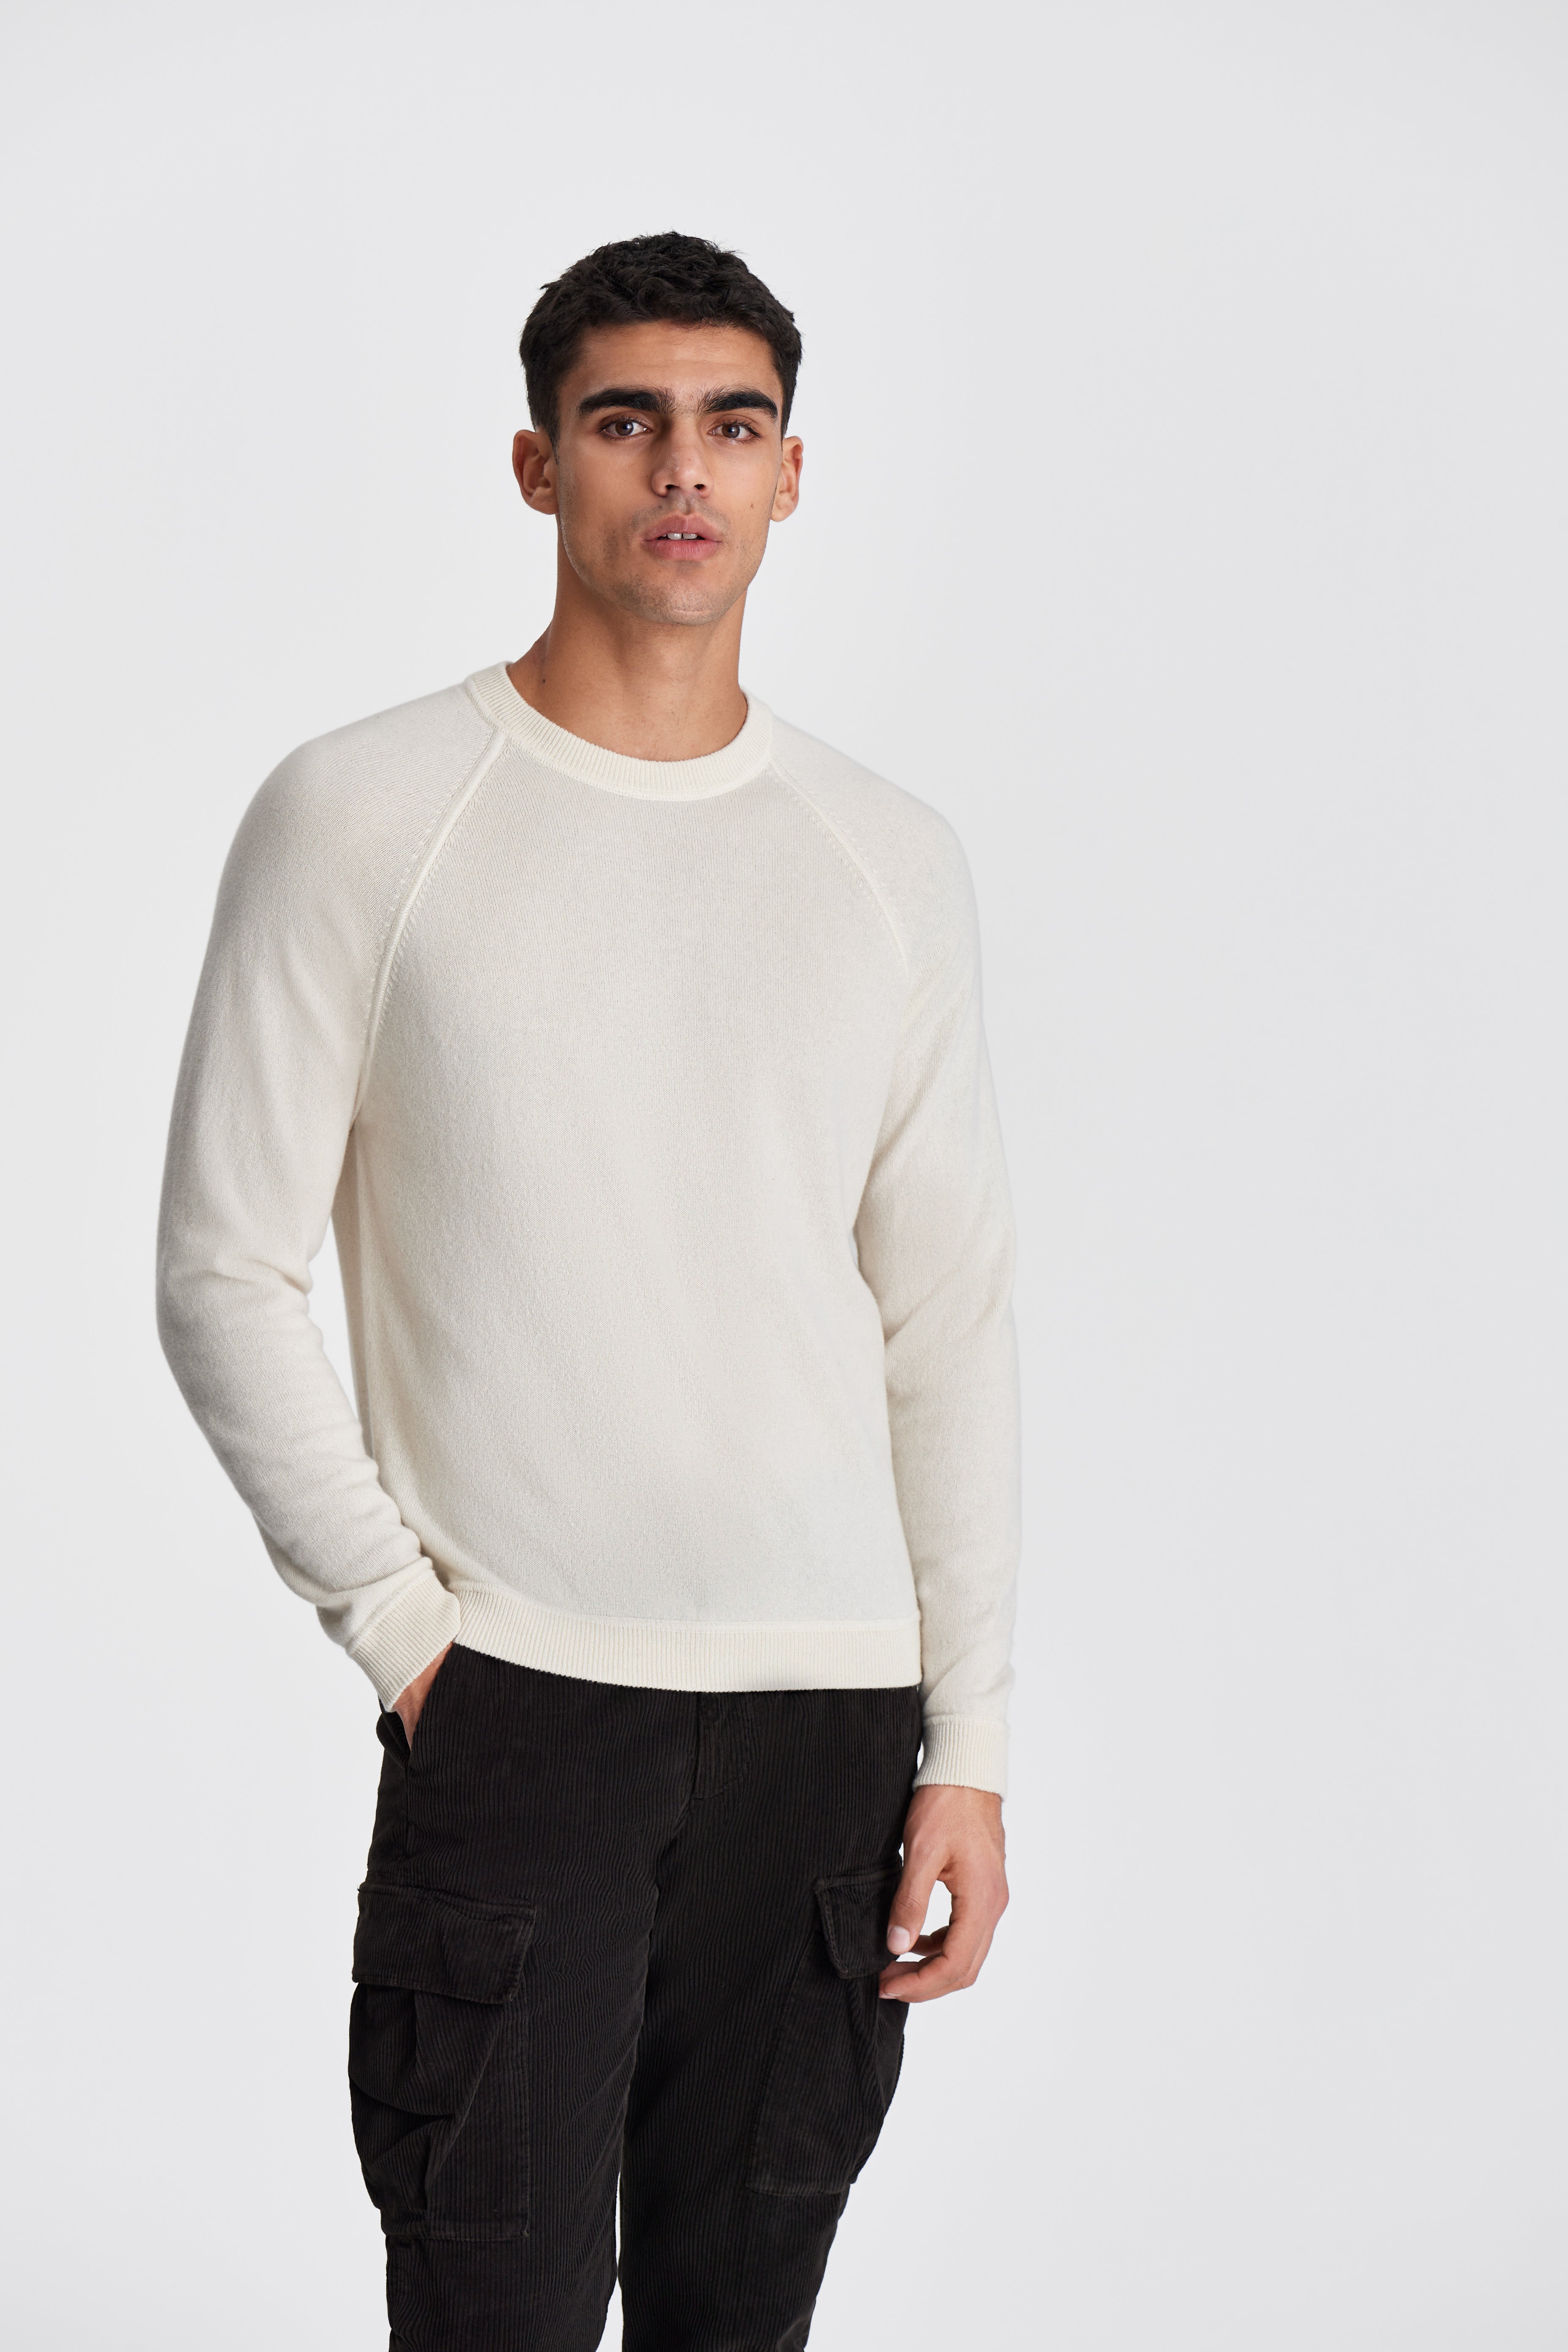 Wool Cashmere Raglan Crew Neck Sweater Off White Model Cropped Image